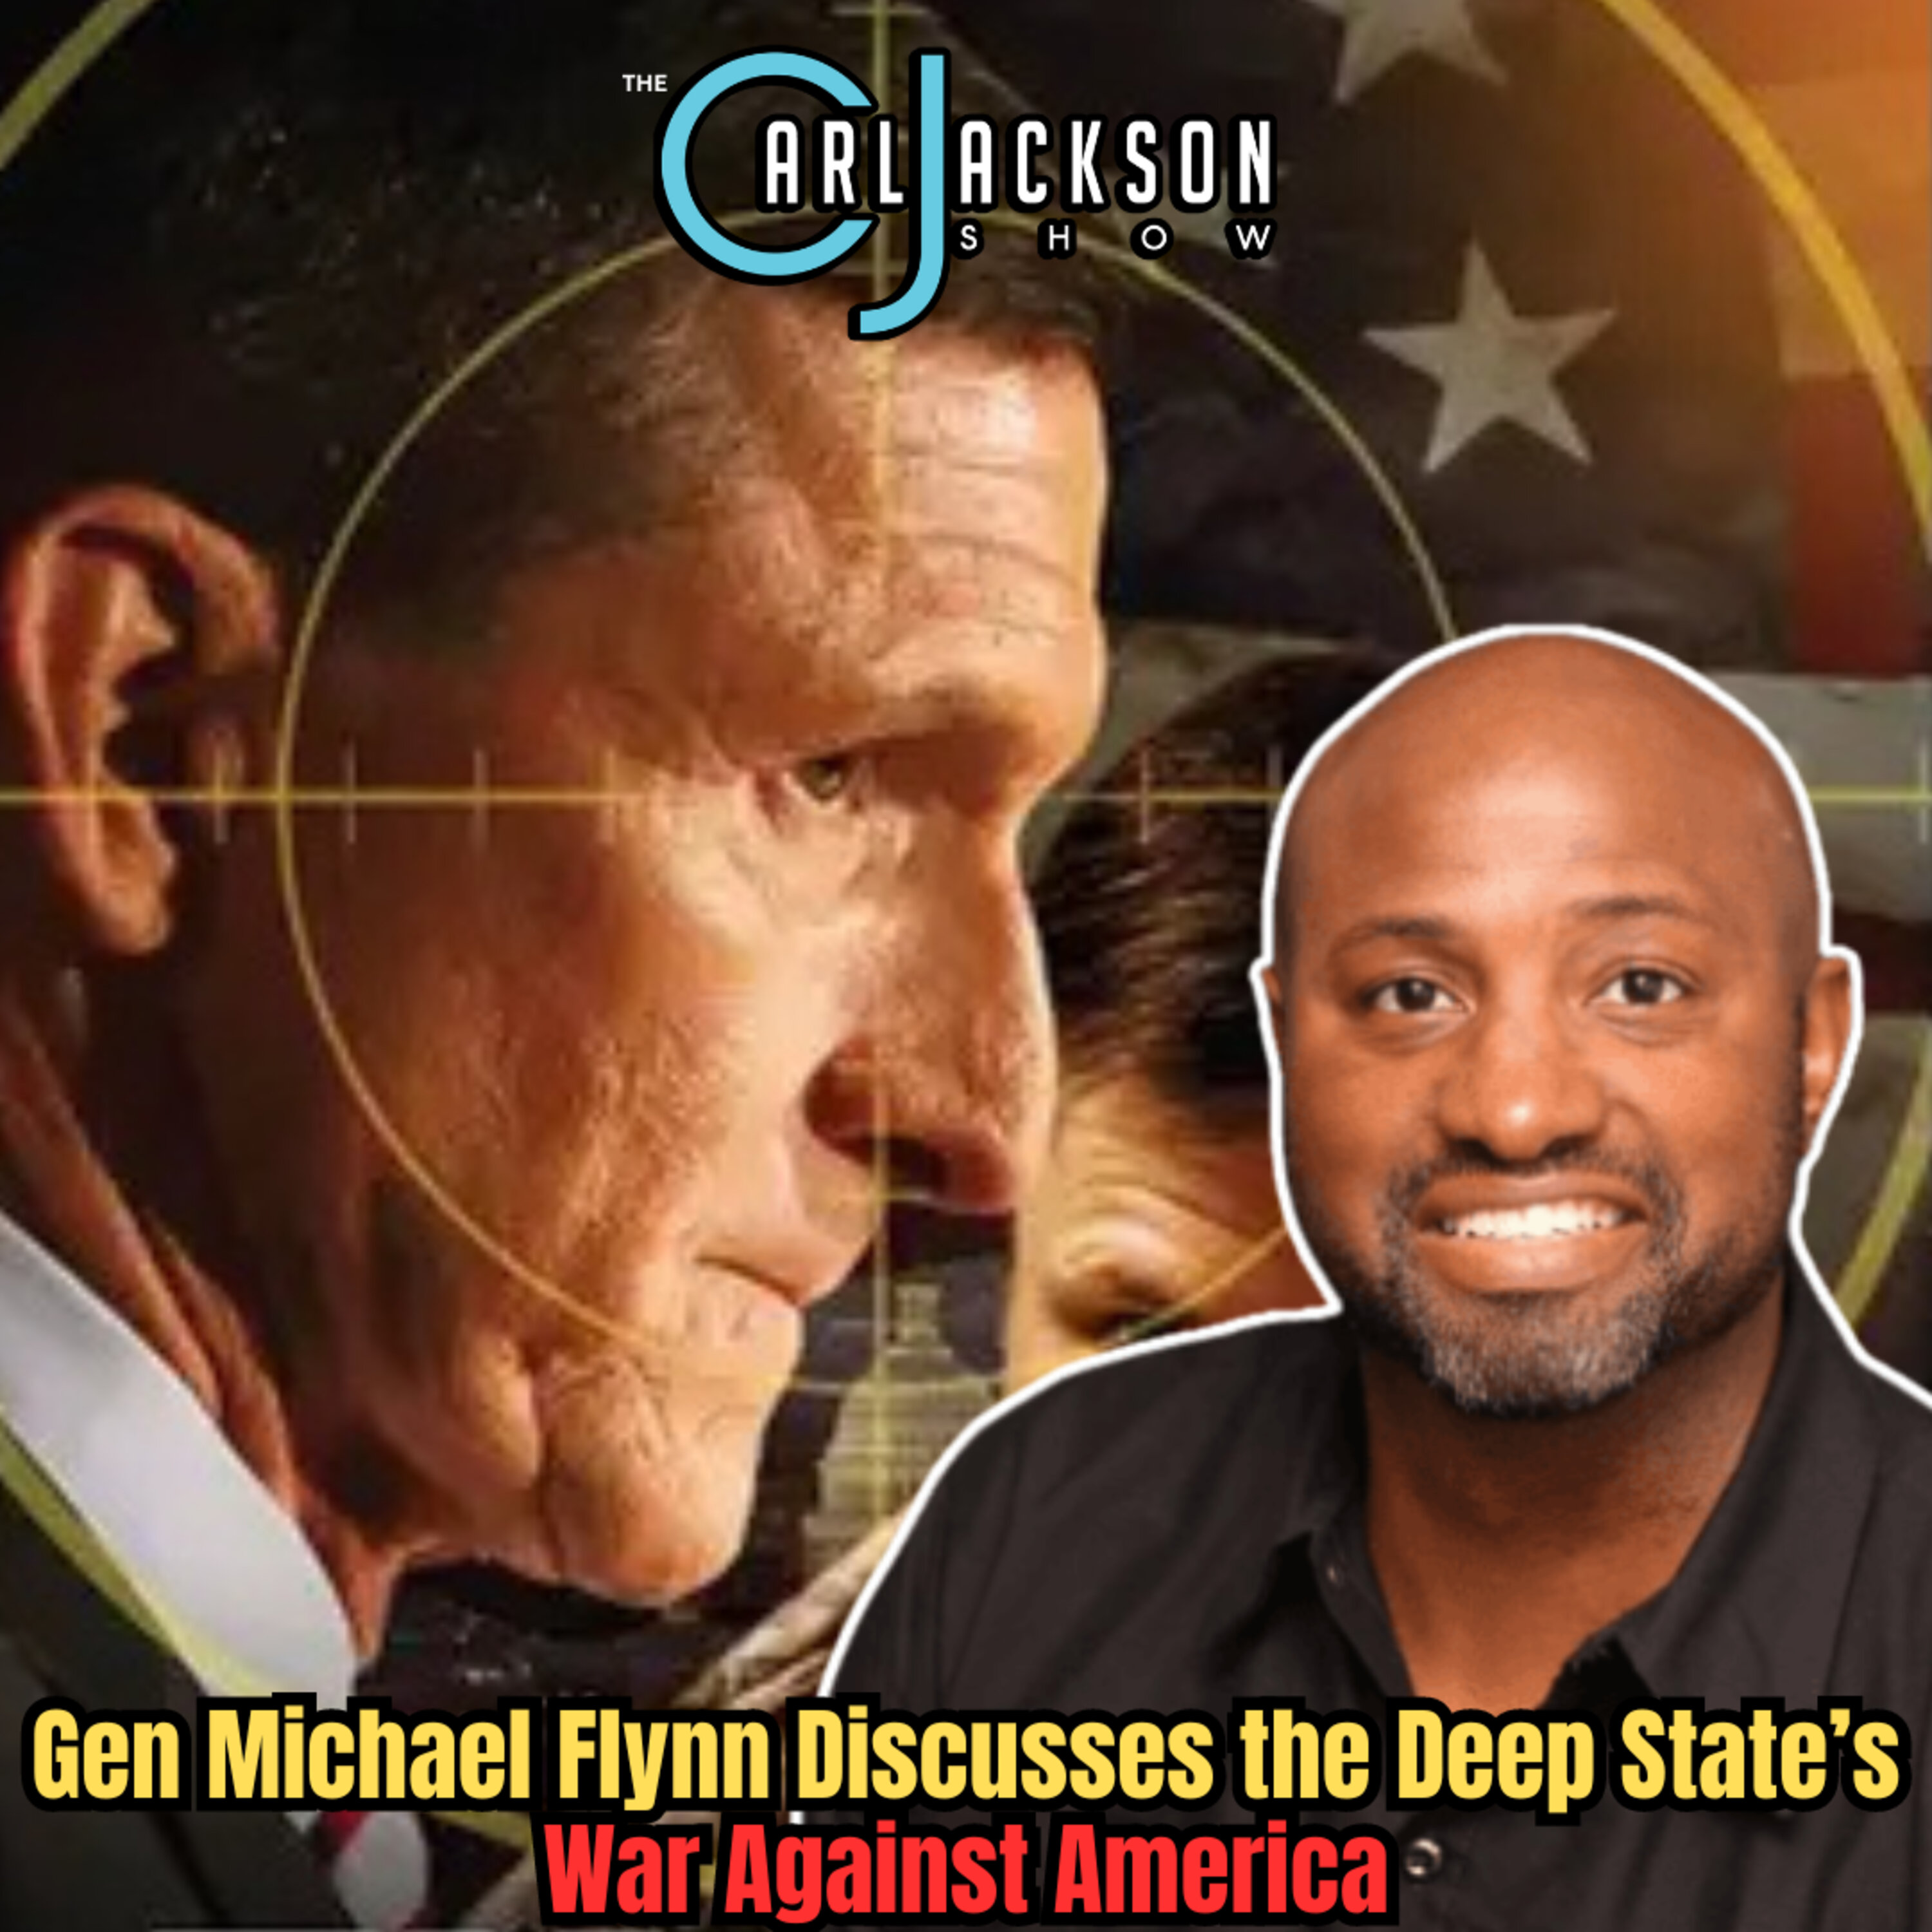 Gen Michael Flynn Discusses the Deep State’s War Against America and You